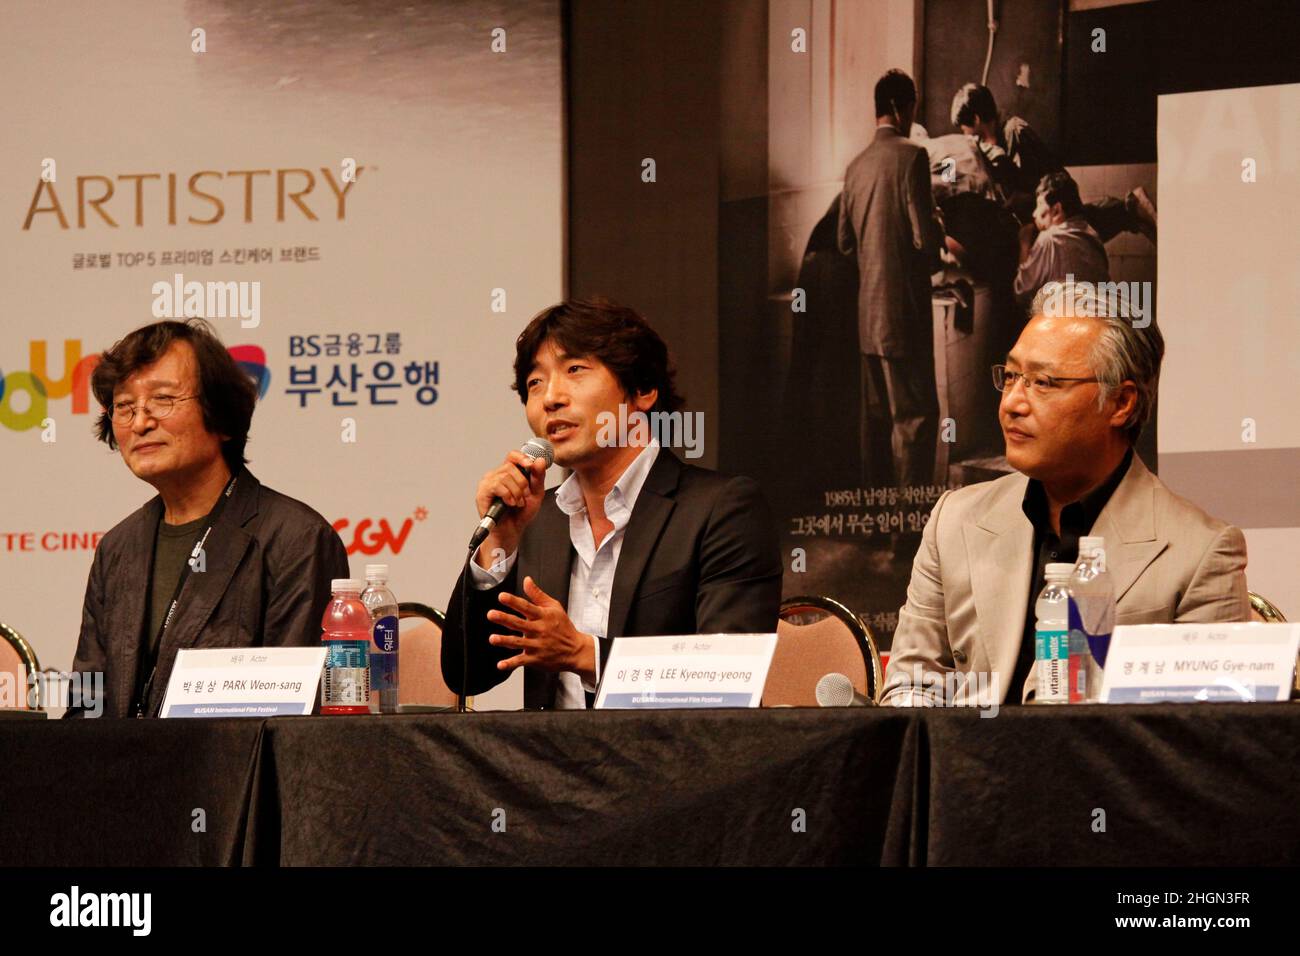 October 6, 2012 - Busan, South Korea : (From lest) Director Chung Ji Young, Actor Park Weon Sang and Lee Kyeong Yeong attend their new film `National Security 1985` Gala Presentation event at the CGV Theater. The film based on the memoir of a democracy activist who was tortured in the 1980s by South Korea's military rulers is provoking discussion about the country's not-so-distant authoritarian past and the influence it will have on this year's presidential election. (Ryu Seung-il / Polaris) Stock Photo